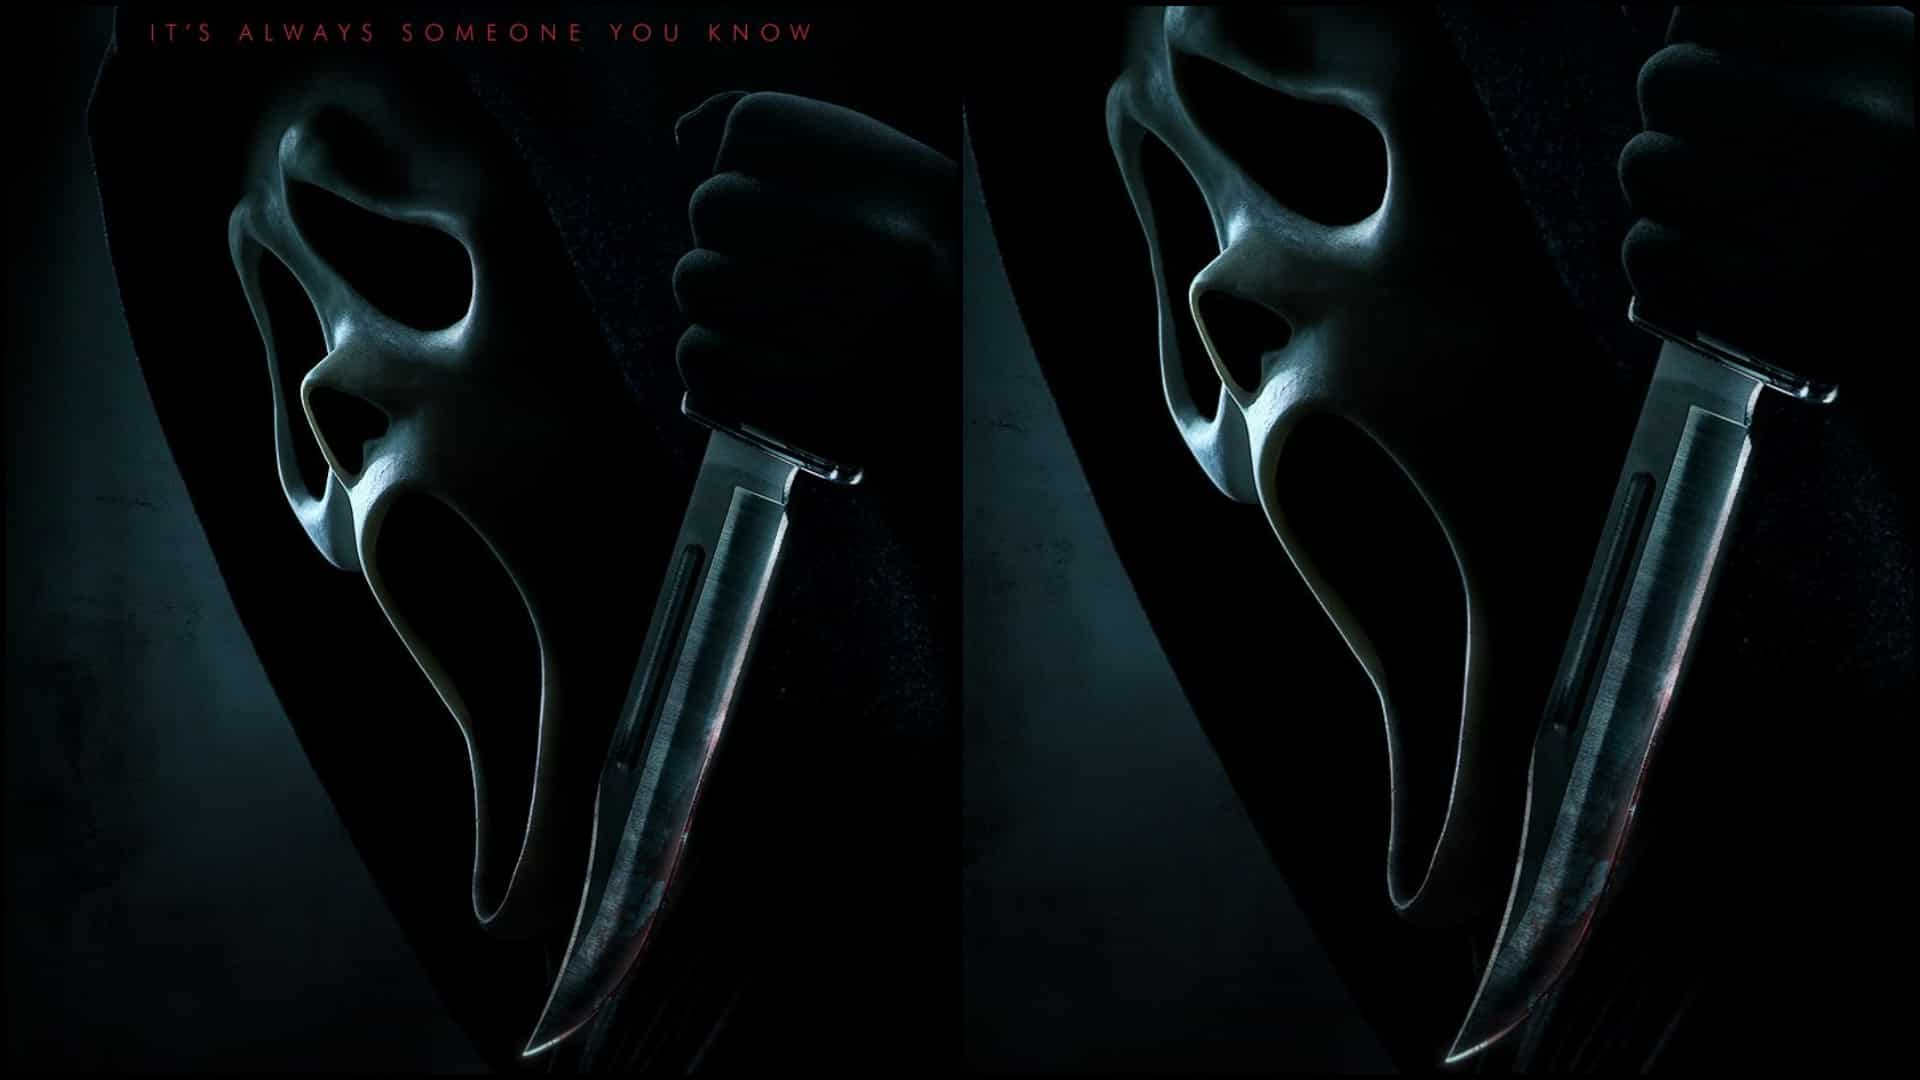 Scream Iconic slasher film to be back in release date